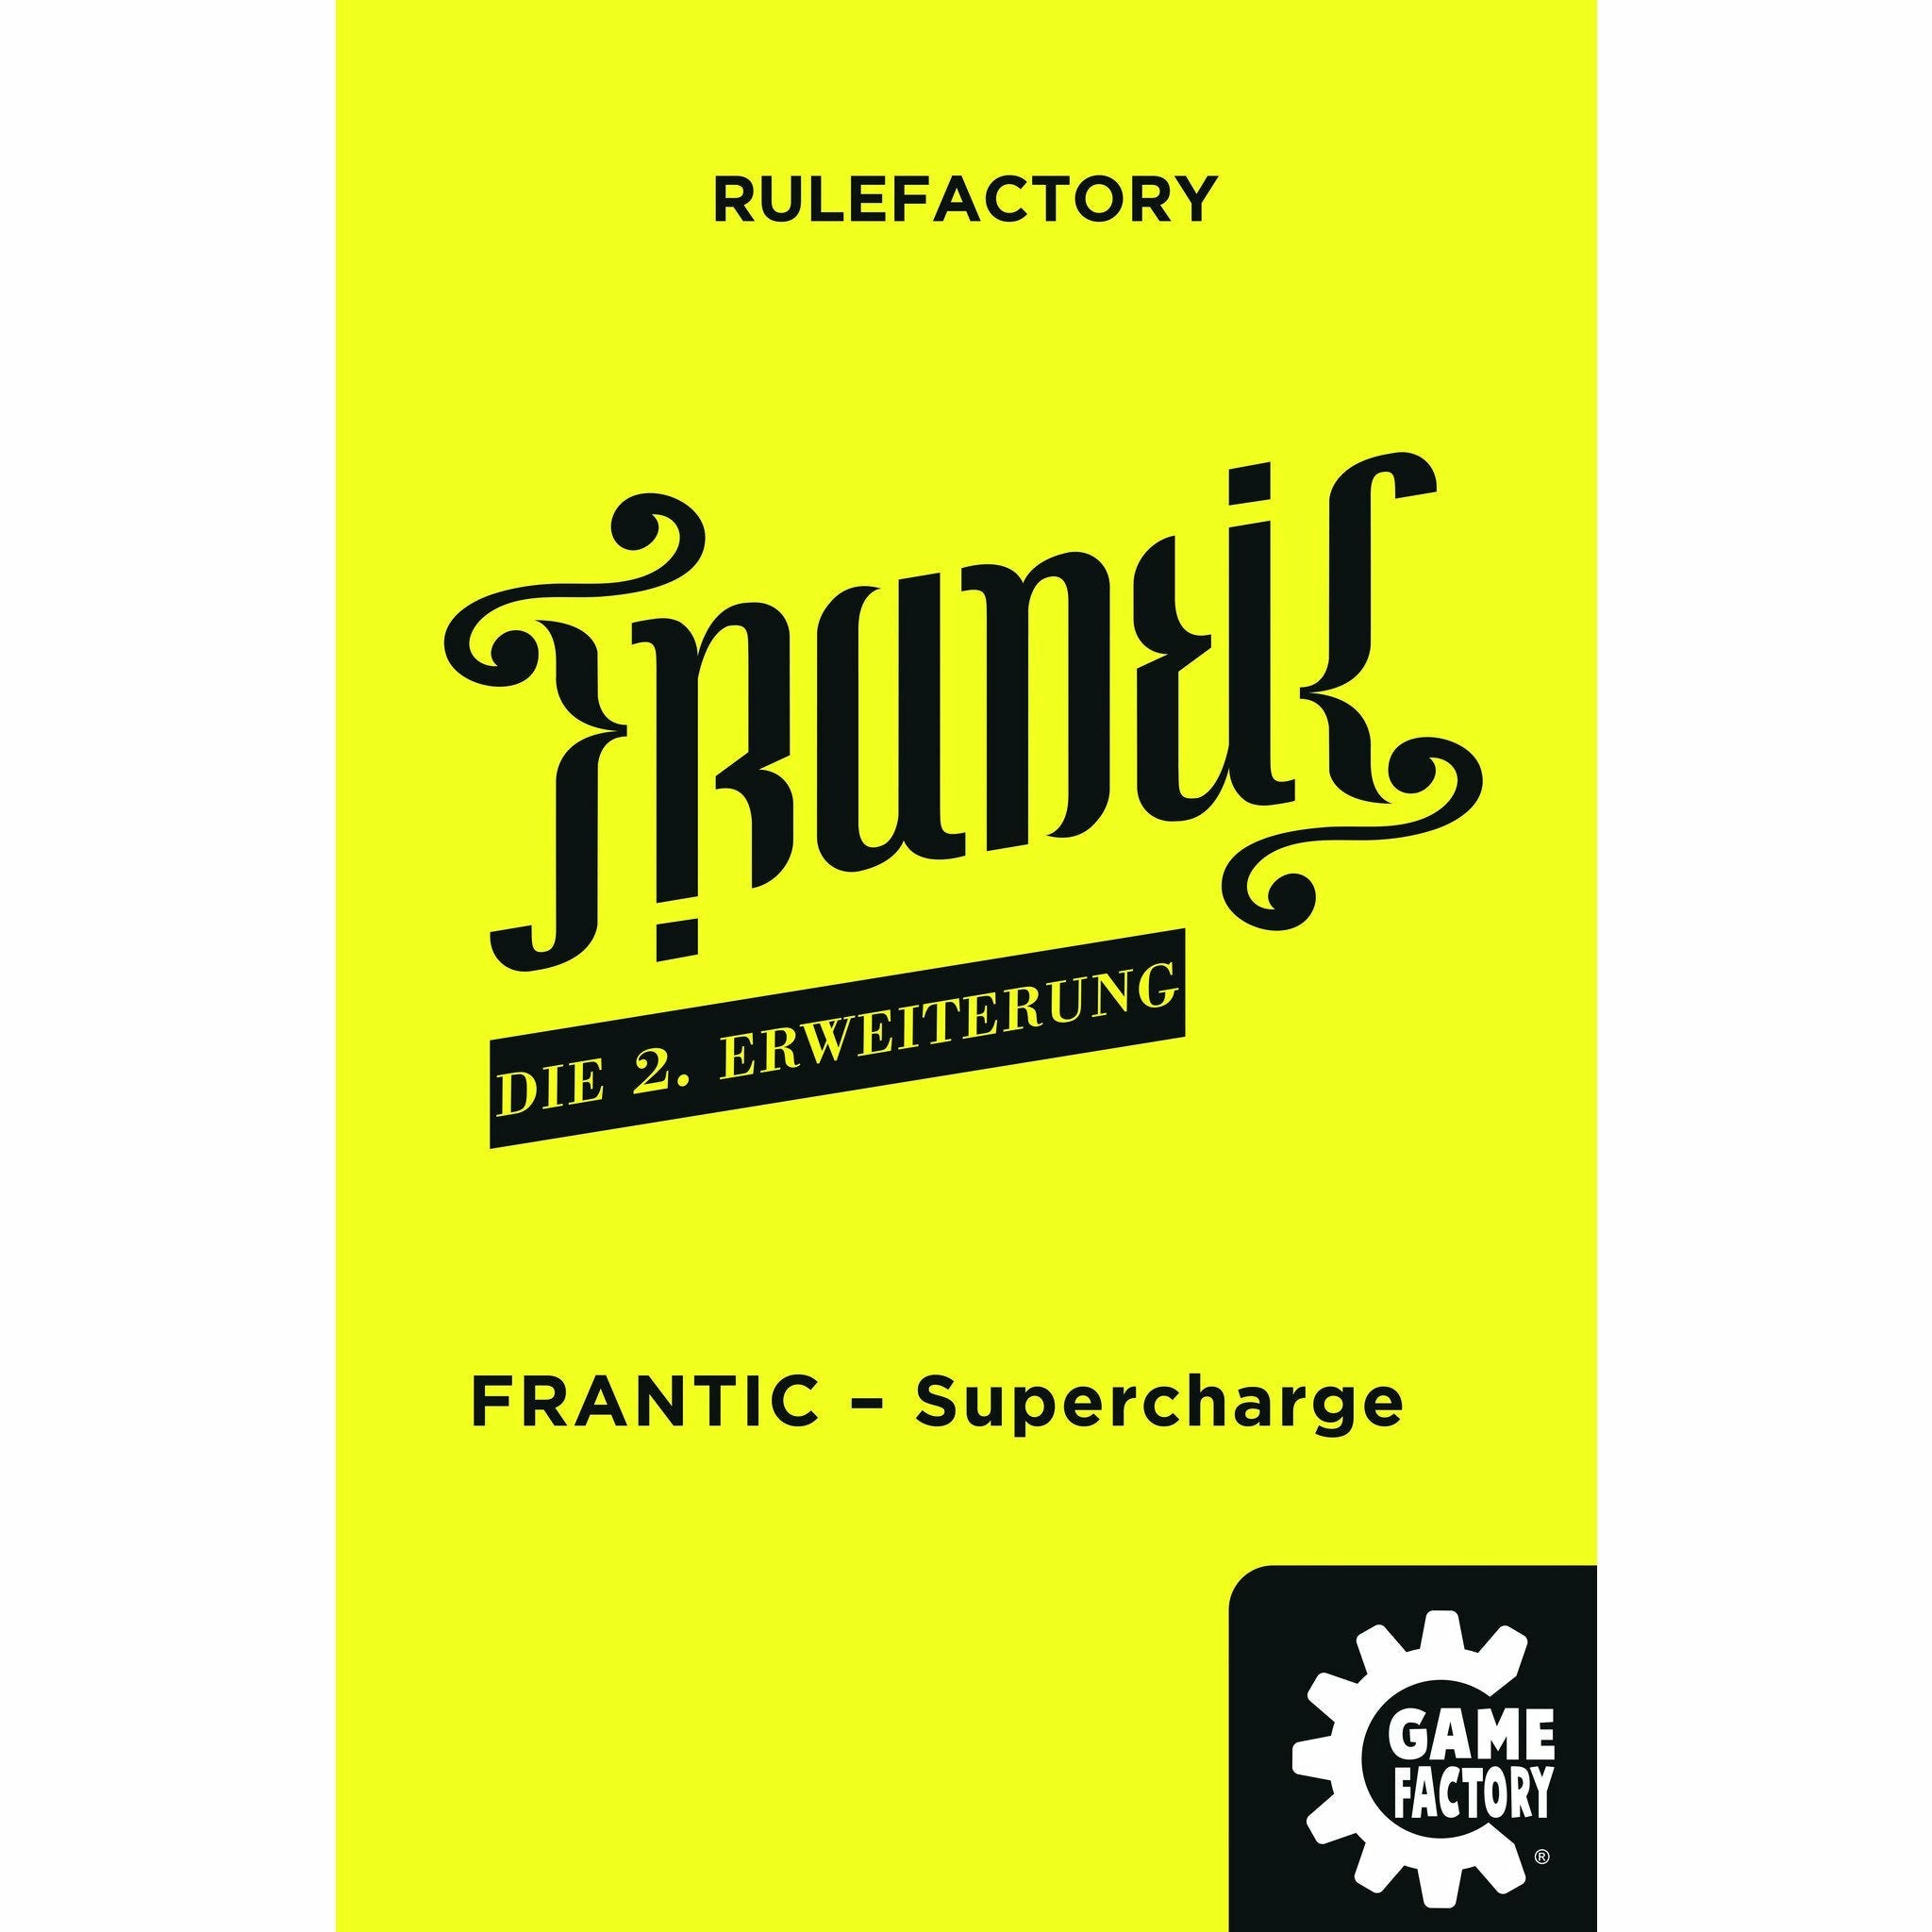 FRANTIC - Supercharge (d) | Carletto | GAMEFACTORY- 2. Erweiterung